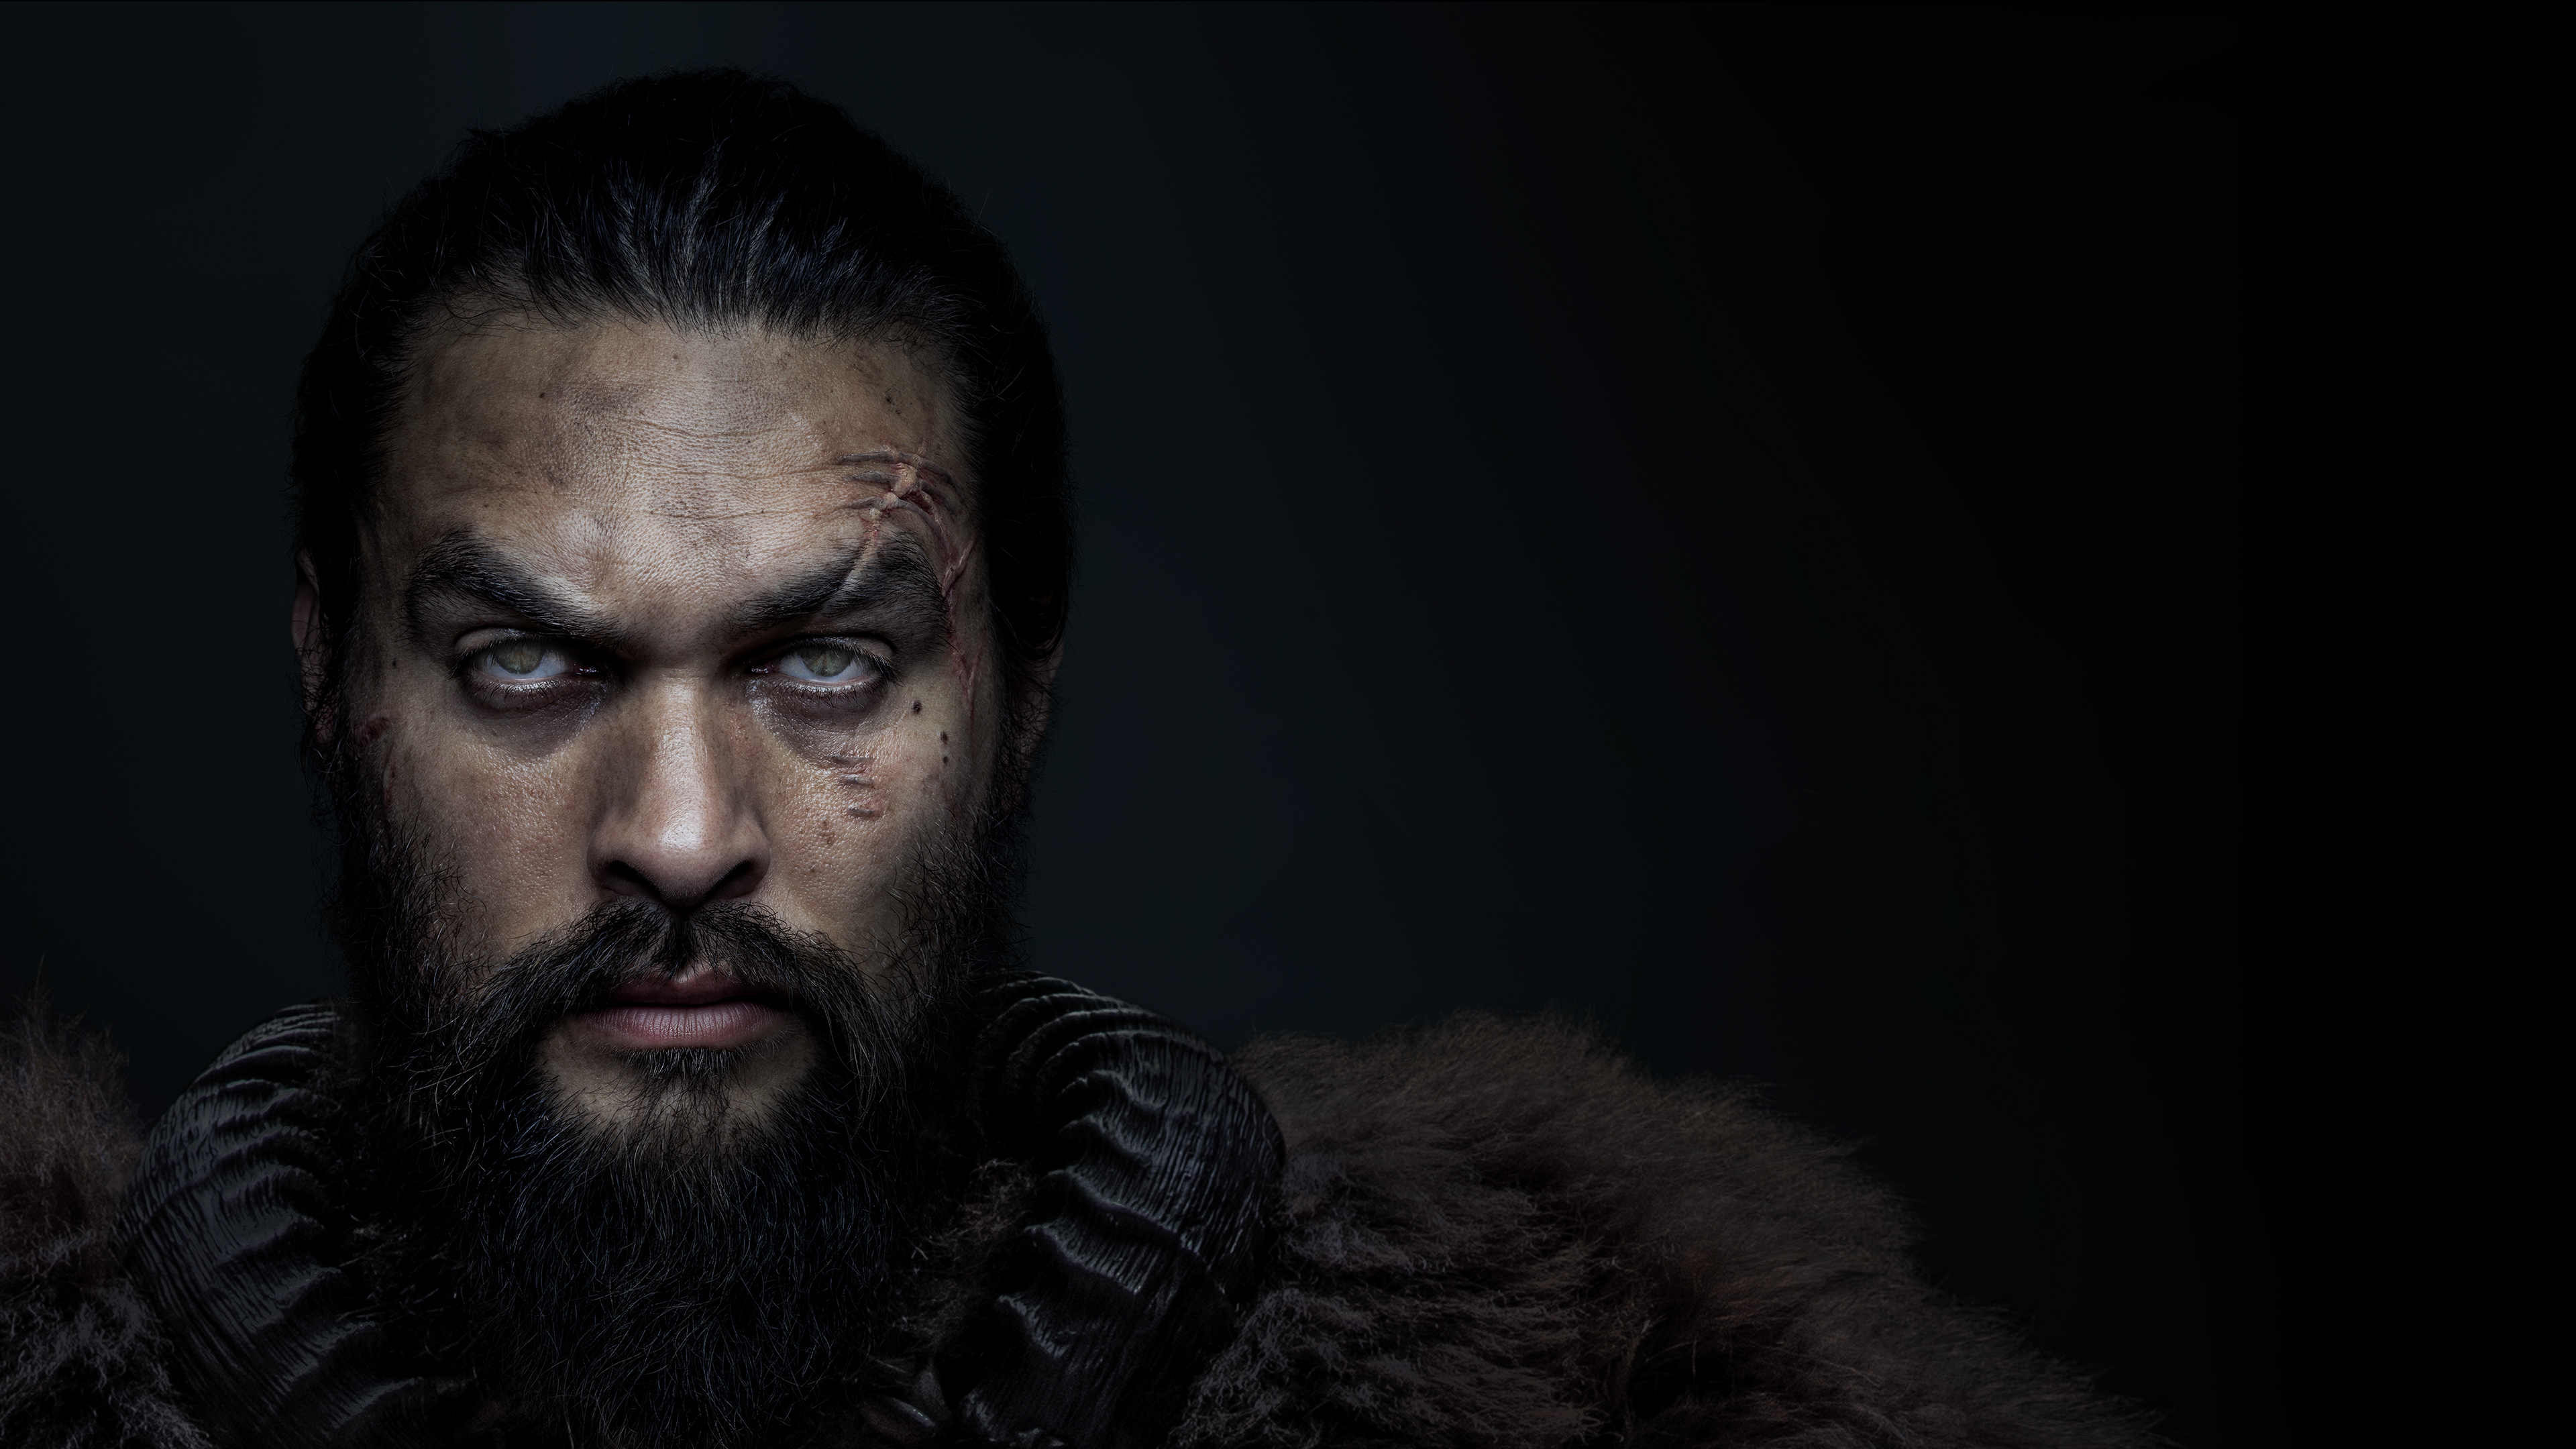 See 2019 Jason Momoa Wallpaper, HD TV Series 4K Wallpapers, Images, Photos and Background3840 x 2160